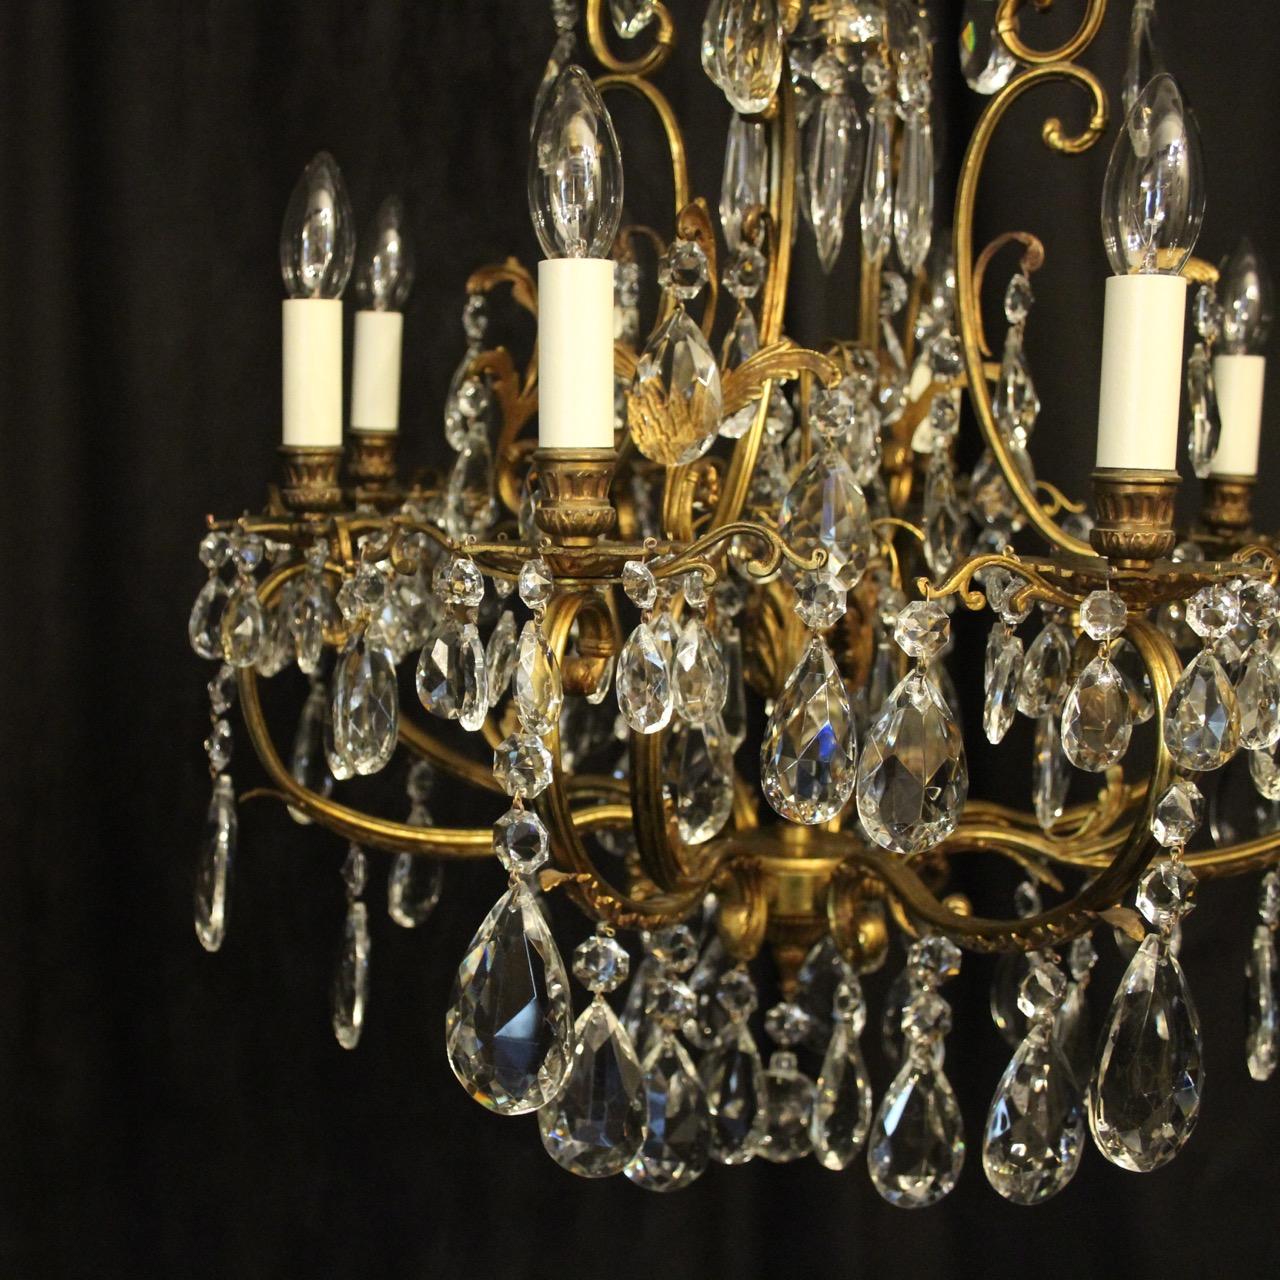 A French gilded bronze and crystal 9-light birdcage form antique chandelier, the eight leaf clad scrolling arms with ornate bobeche drip pans and bulbous candle sconces, issuing from a foliated cage form interior with a single inverted light fitting